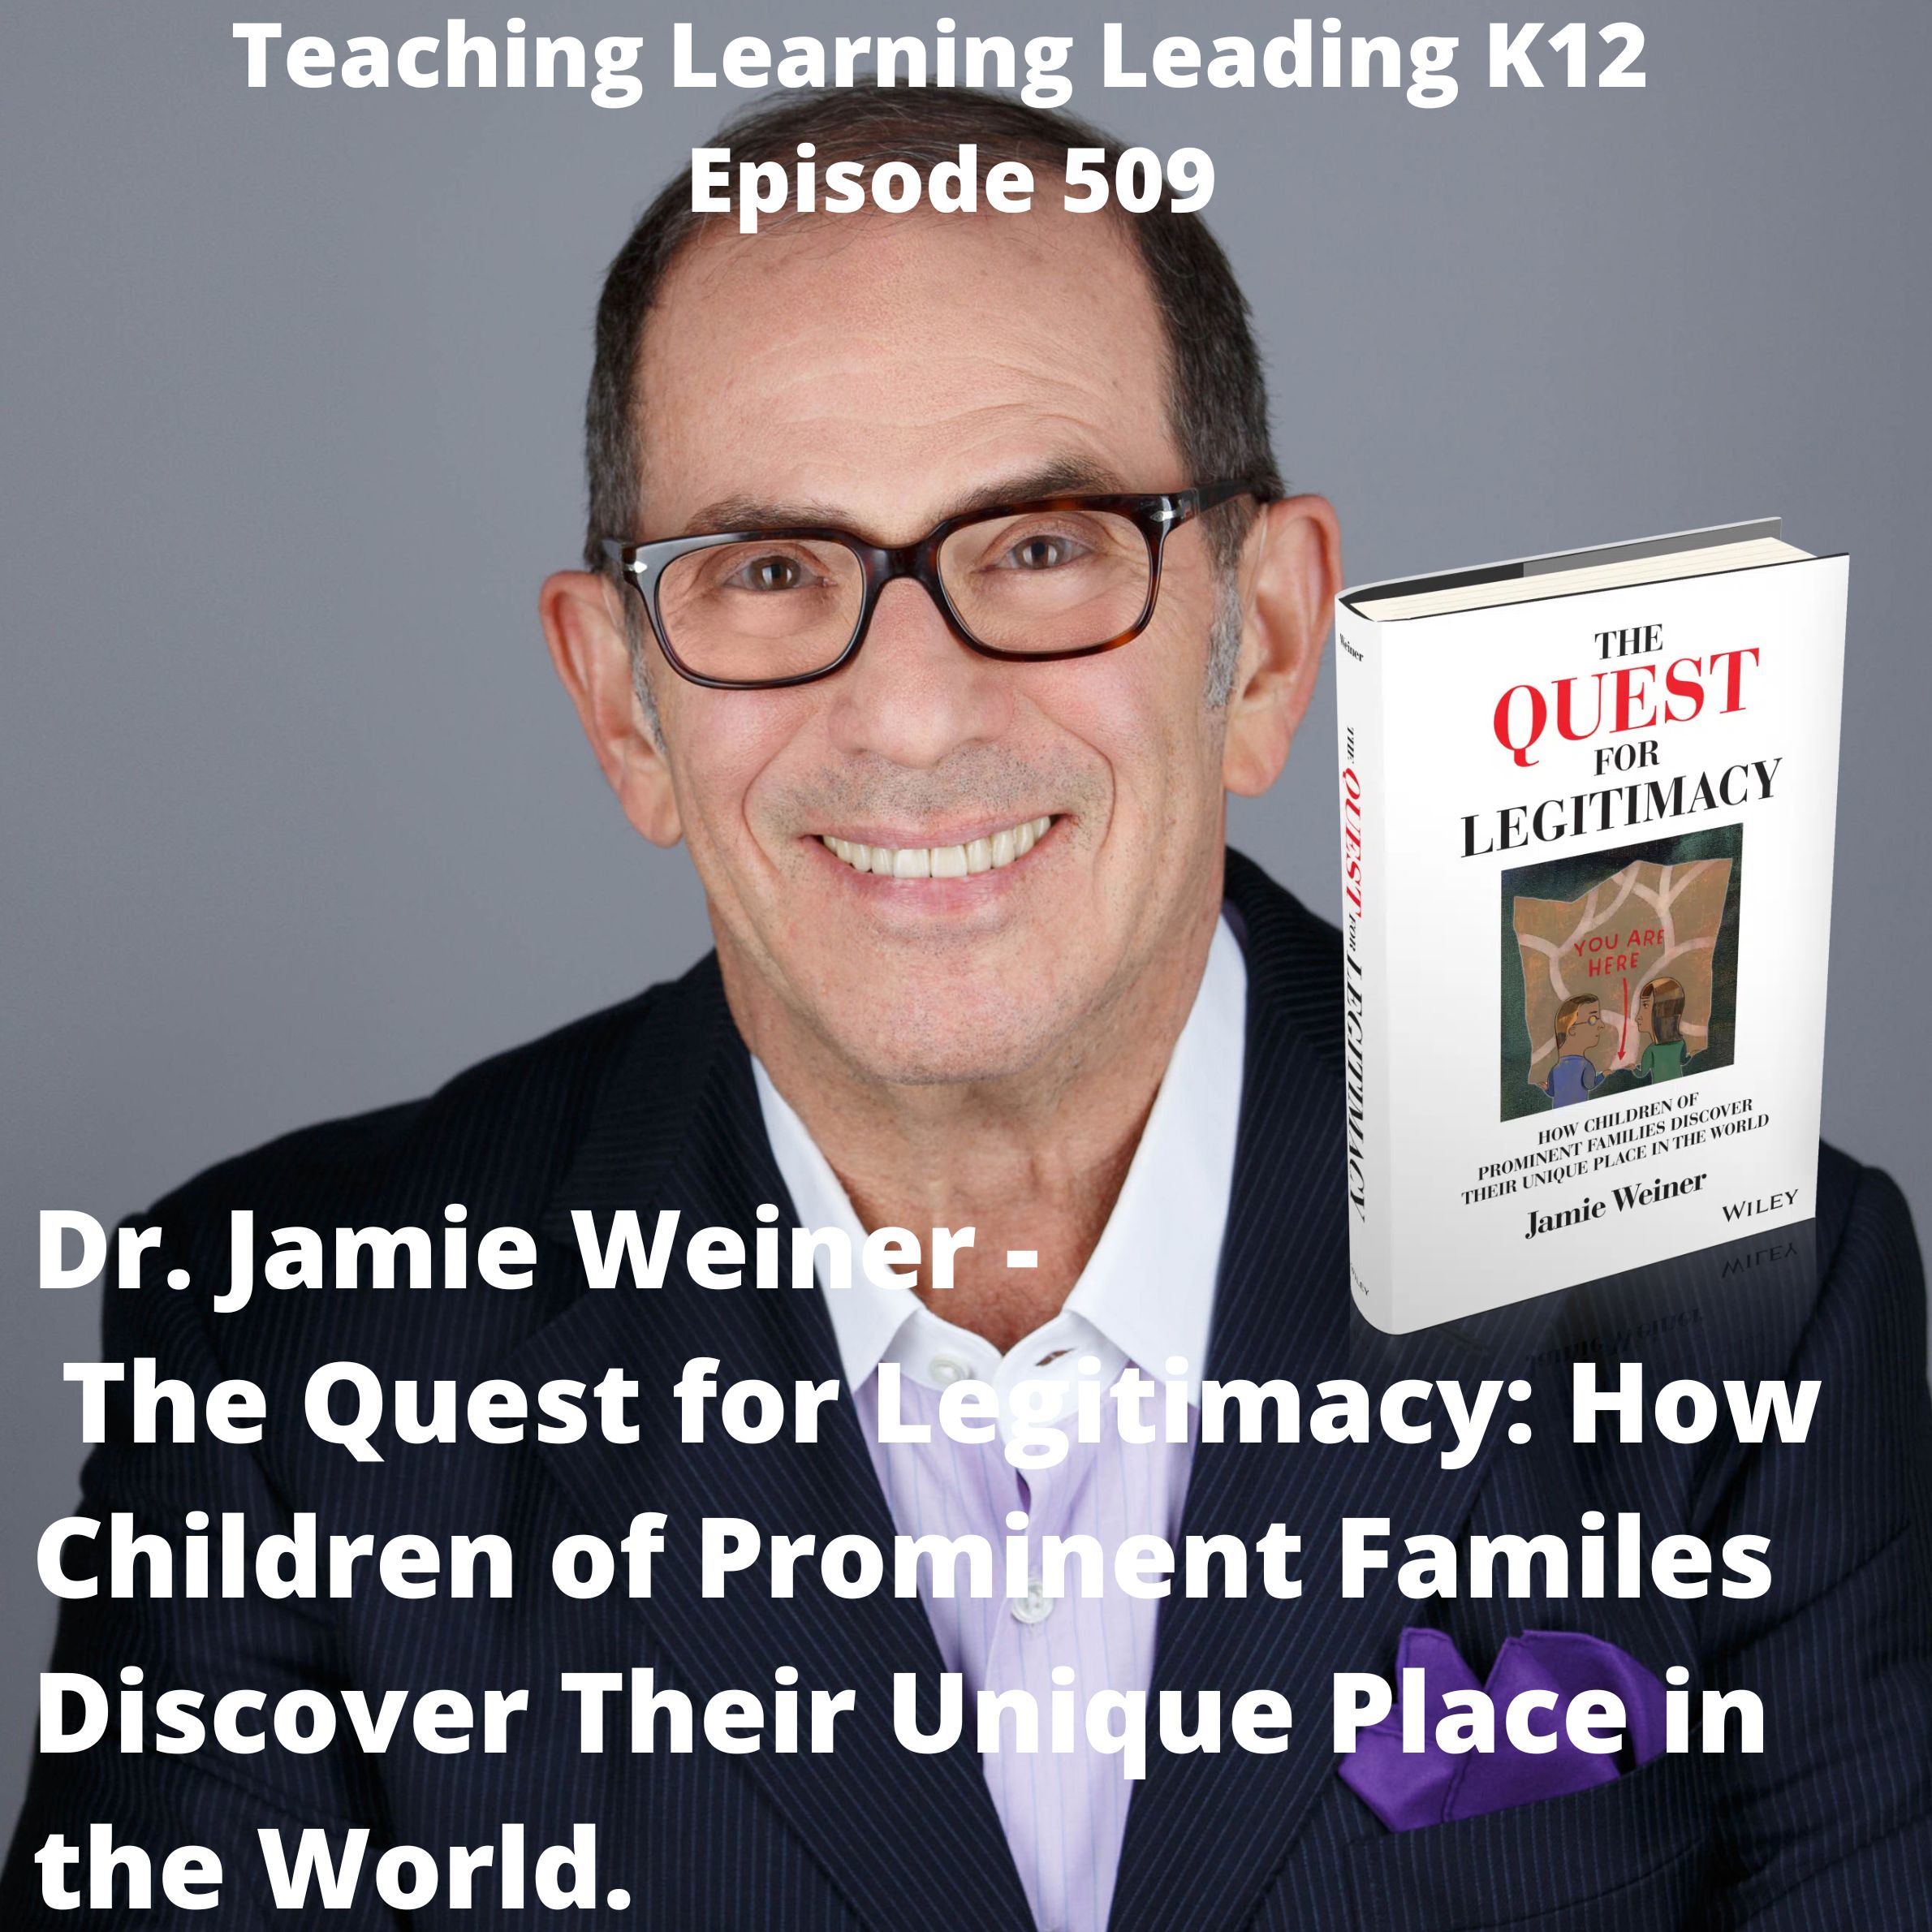 Dr. Jamie Weiner - The Quest for Legitimacy: How Children of Prominent Families Discover Their Unique Place in the World - 509 Image